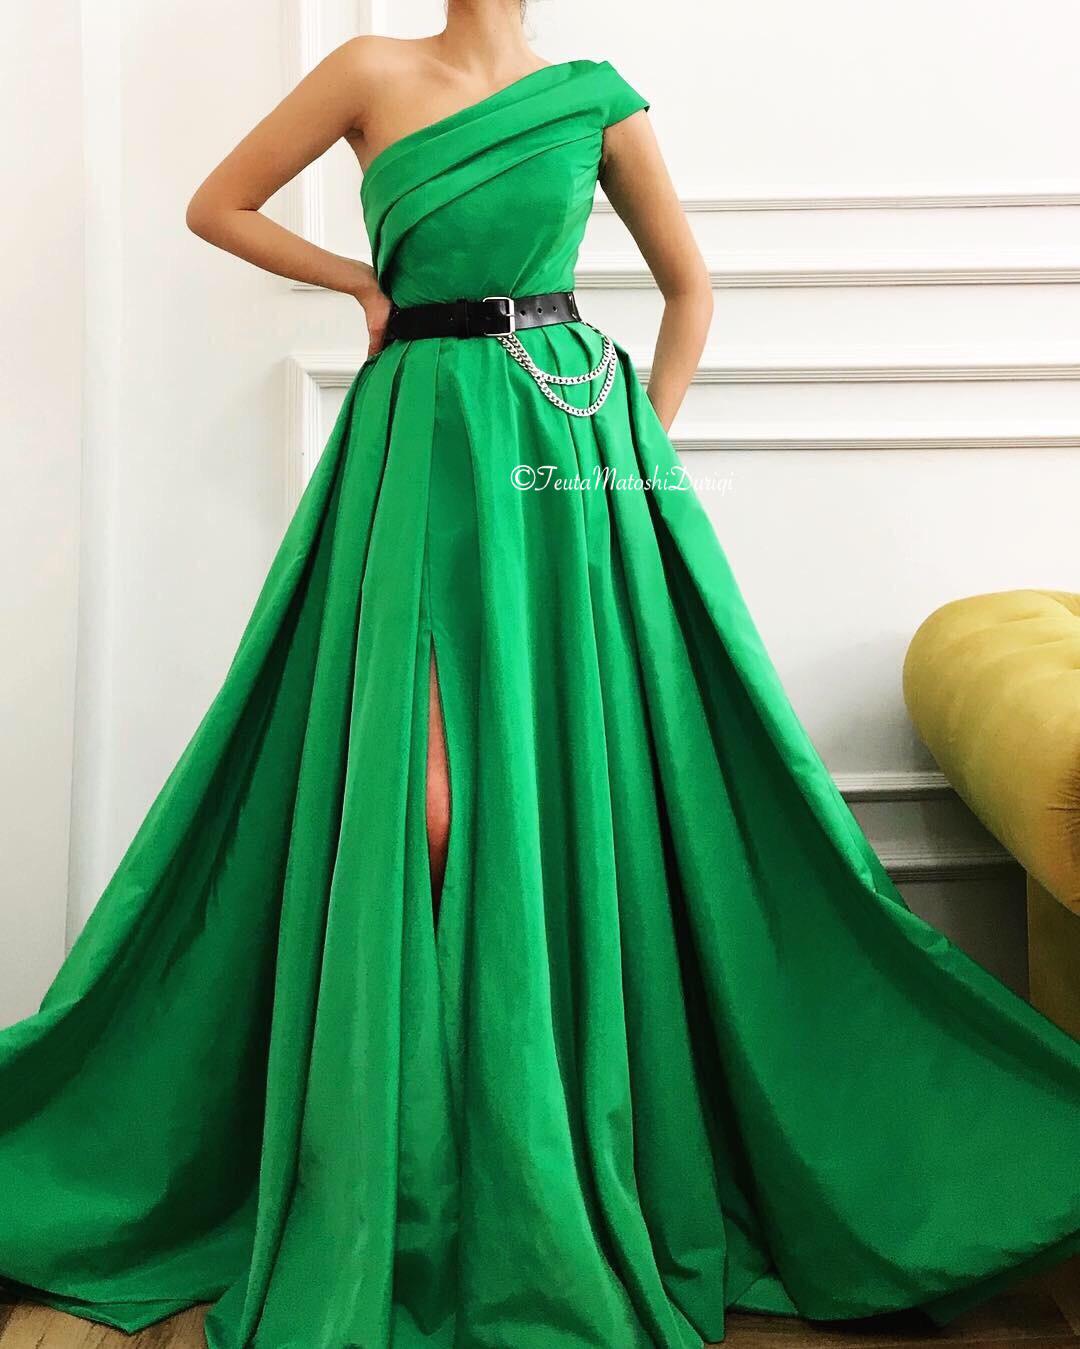 Green A-Line dress with belt and one shoulder sleeve